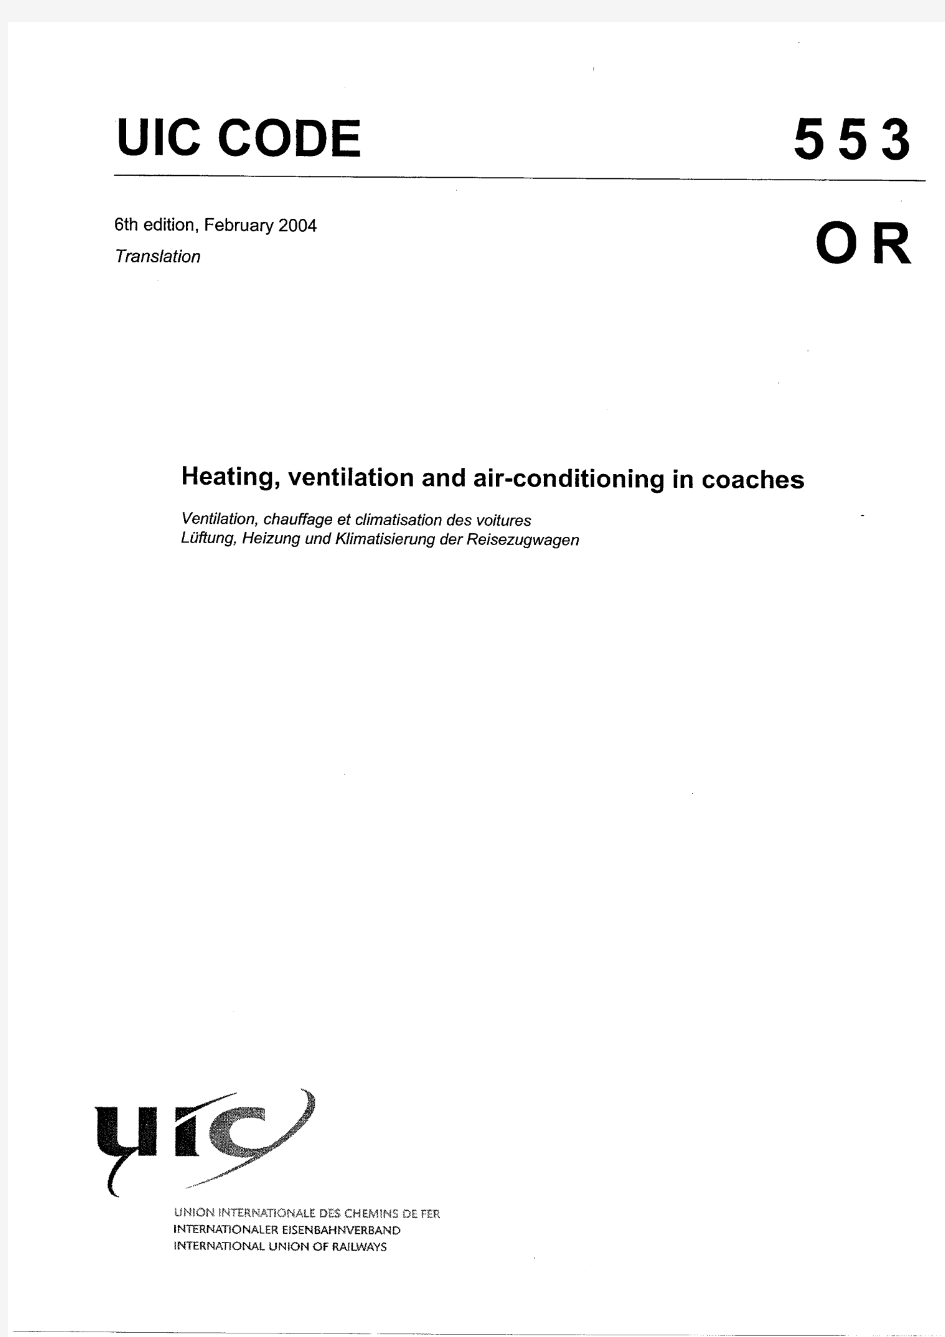 UIC 553 OR- 2004 Heating, Ventilation and Air Conditioning in Coaches